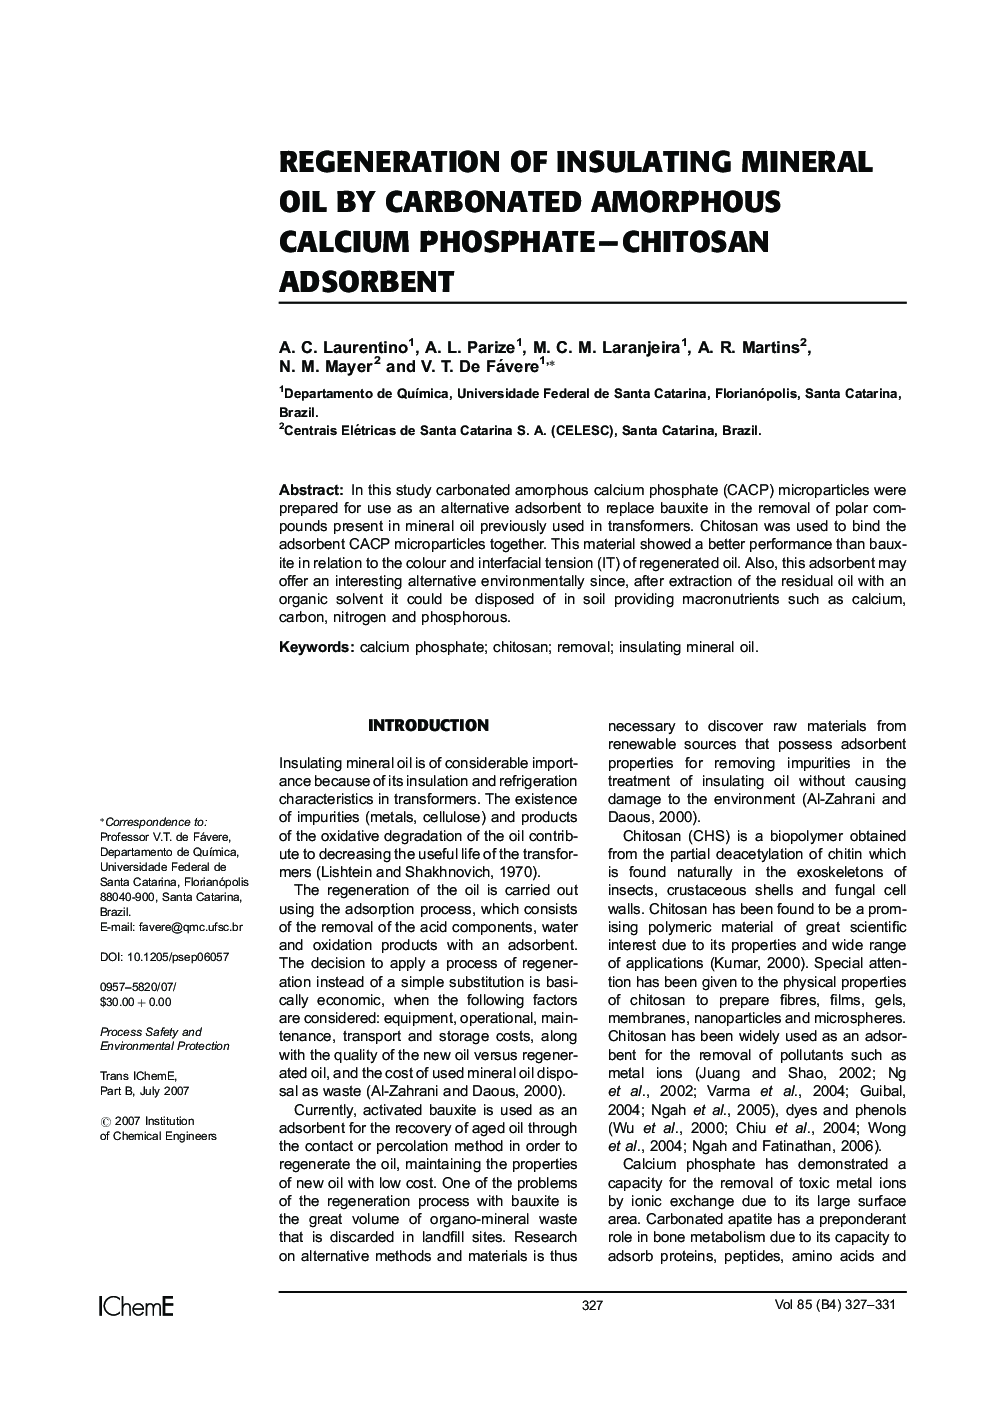 Regeneration of Insulating Mineral Oil by Carbonated Amorphous Calcium Phosphate–Chitosan Adsorbent